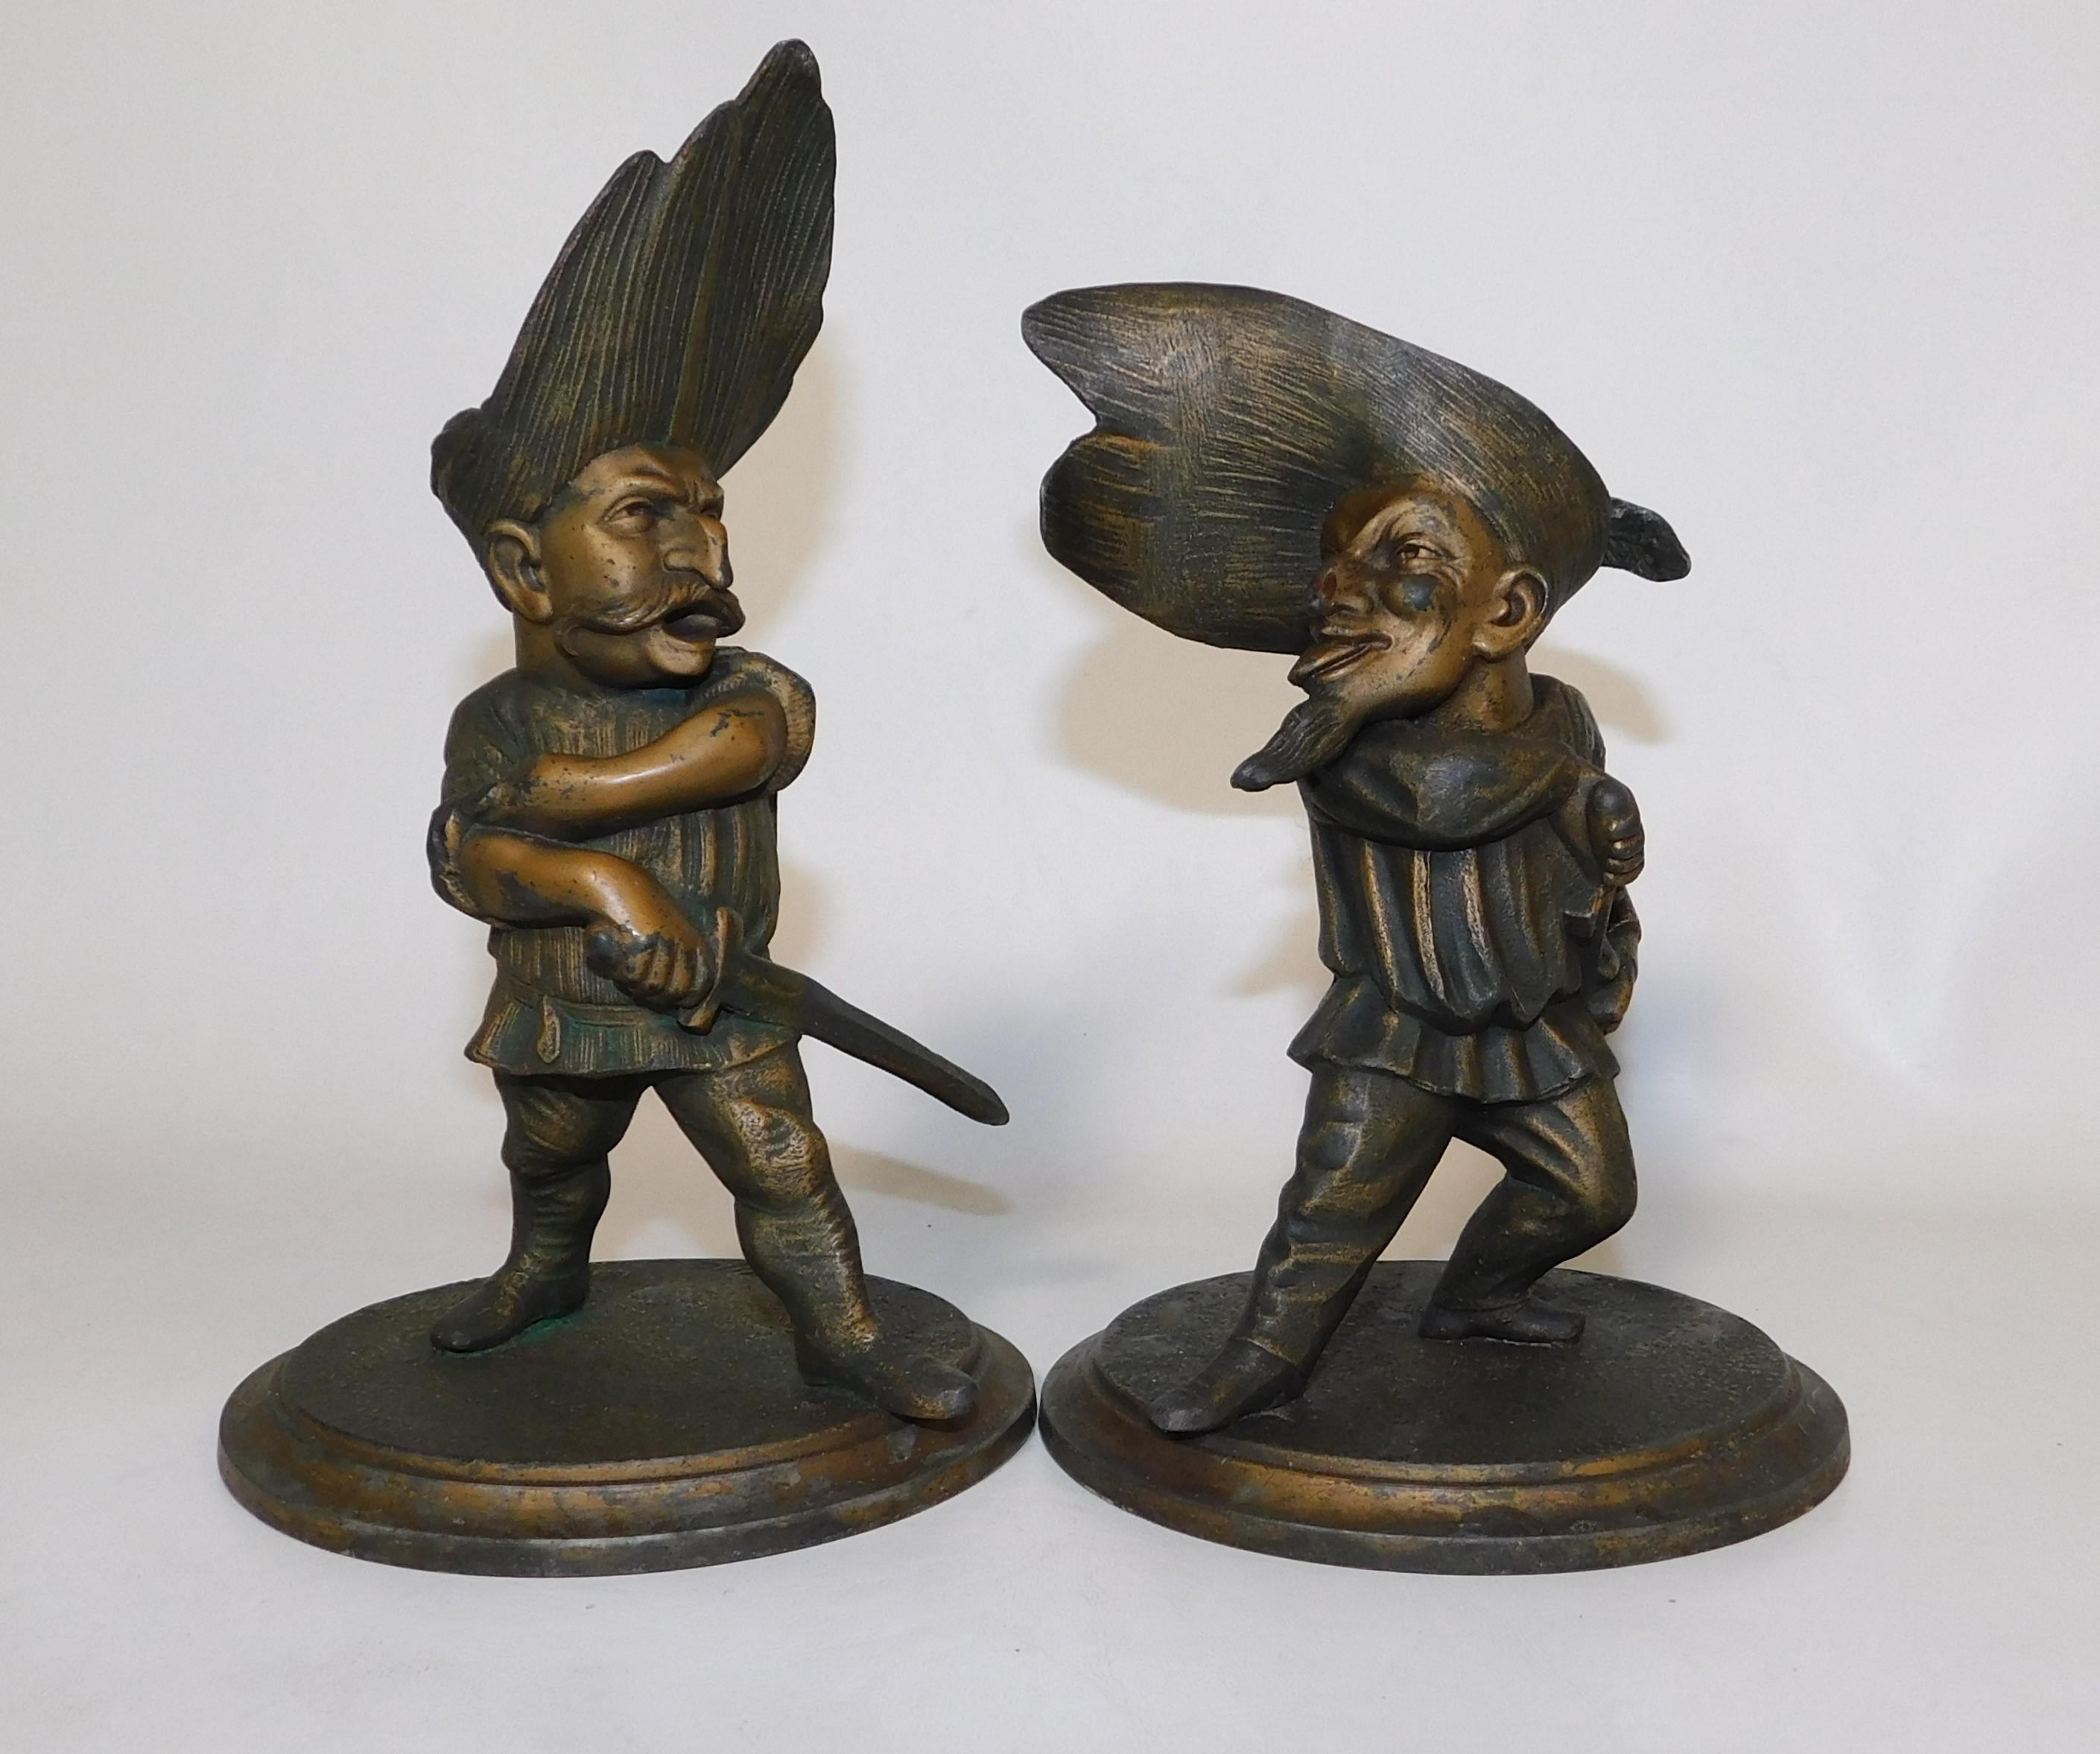 Rare pare of candle holders by French artist Francois George (1807-1873). François George designed a whole series of whimsical cartoon characters which were executed as candle holders often doing self portraits of himself. These two figures are of